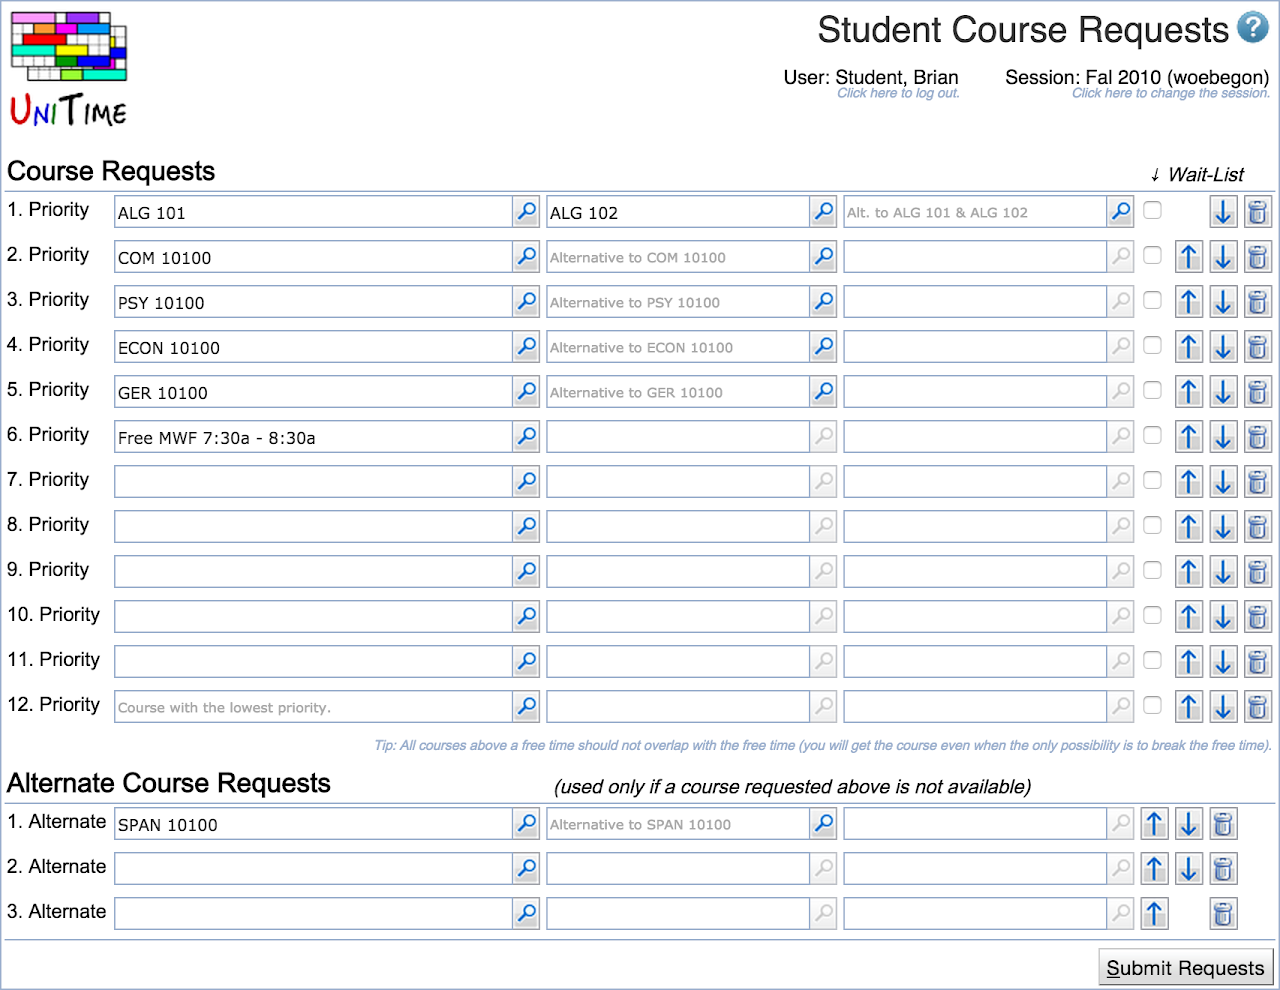 Student Course Requests